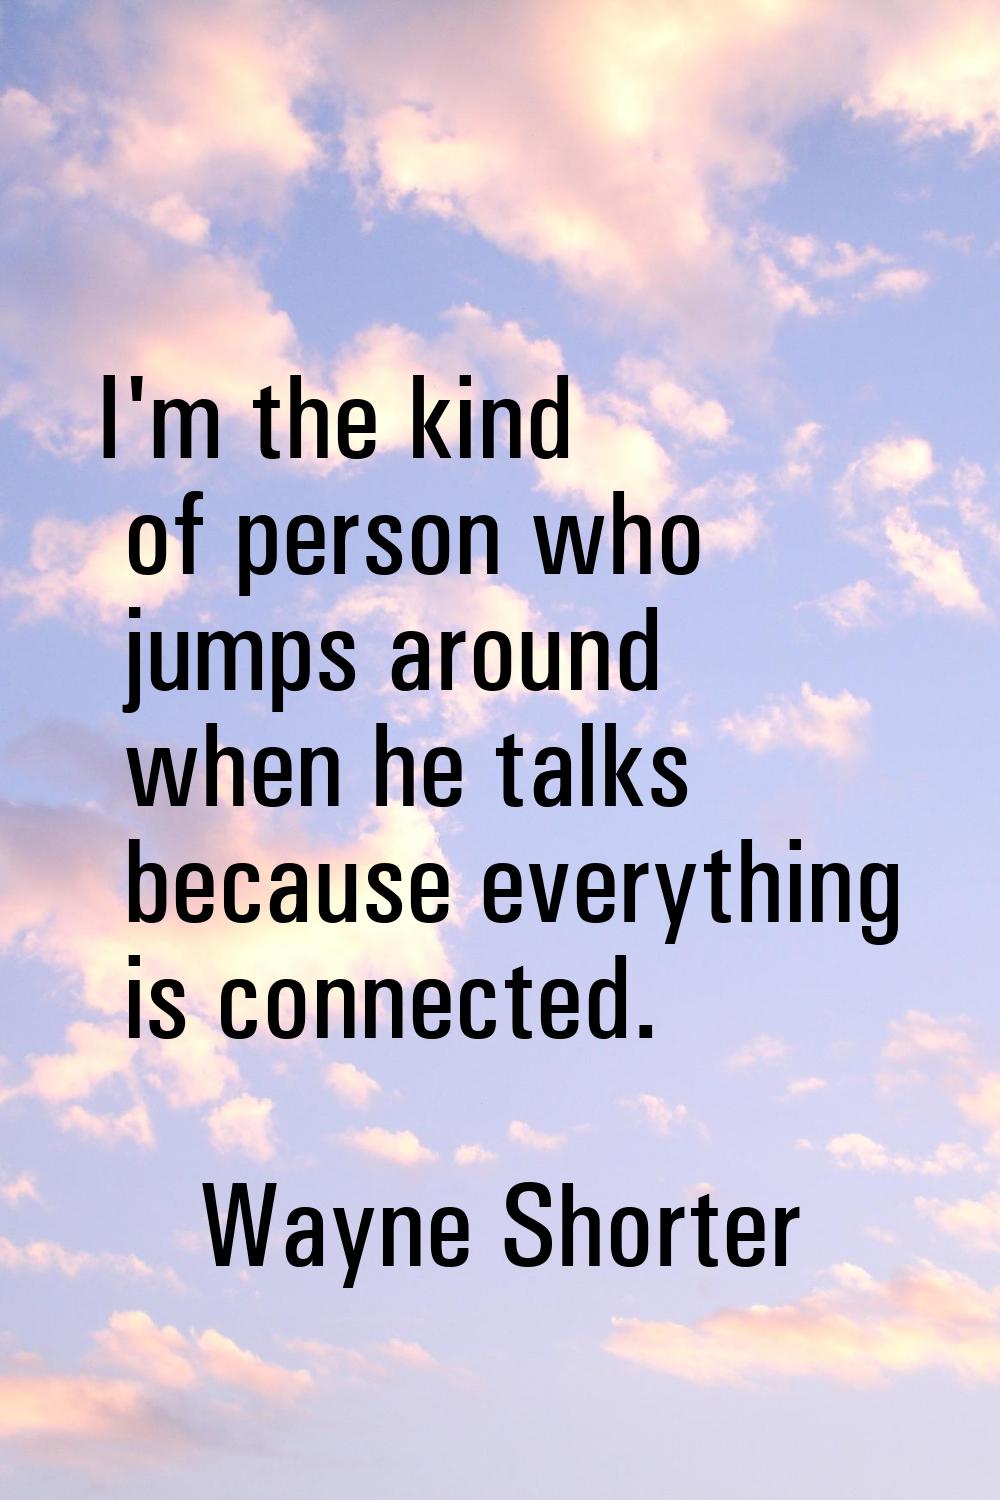 I'm the kind of person who jumps around when he talks because everything is connected.